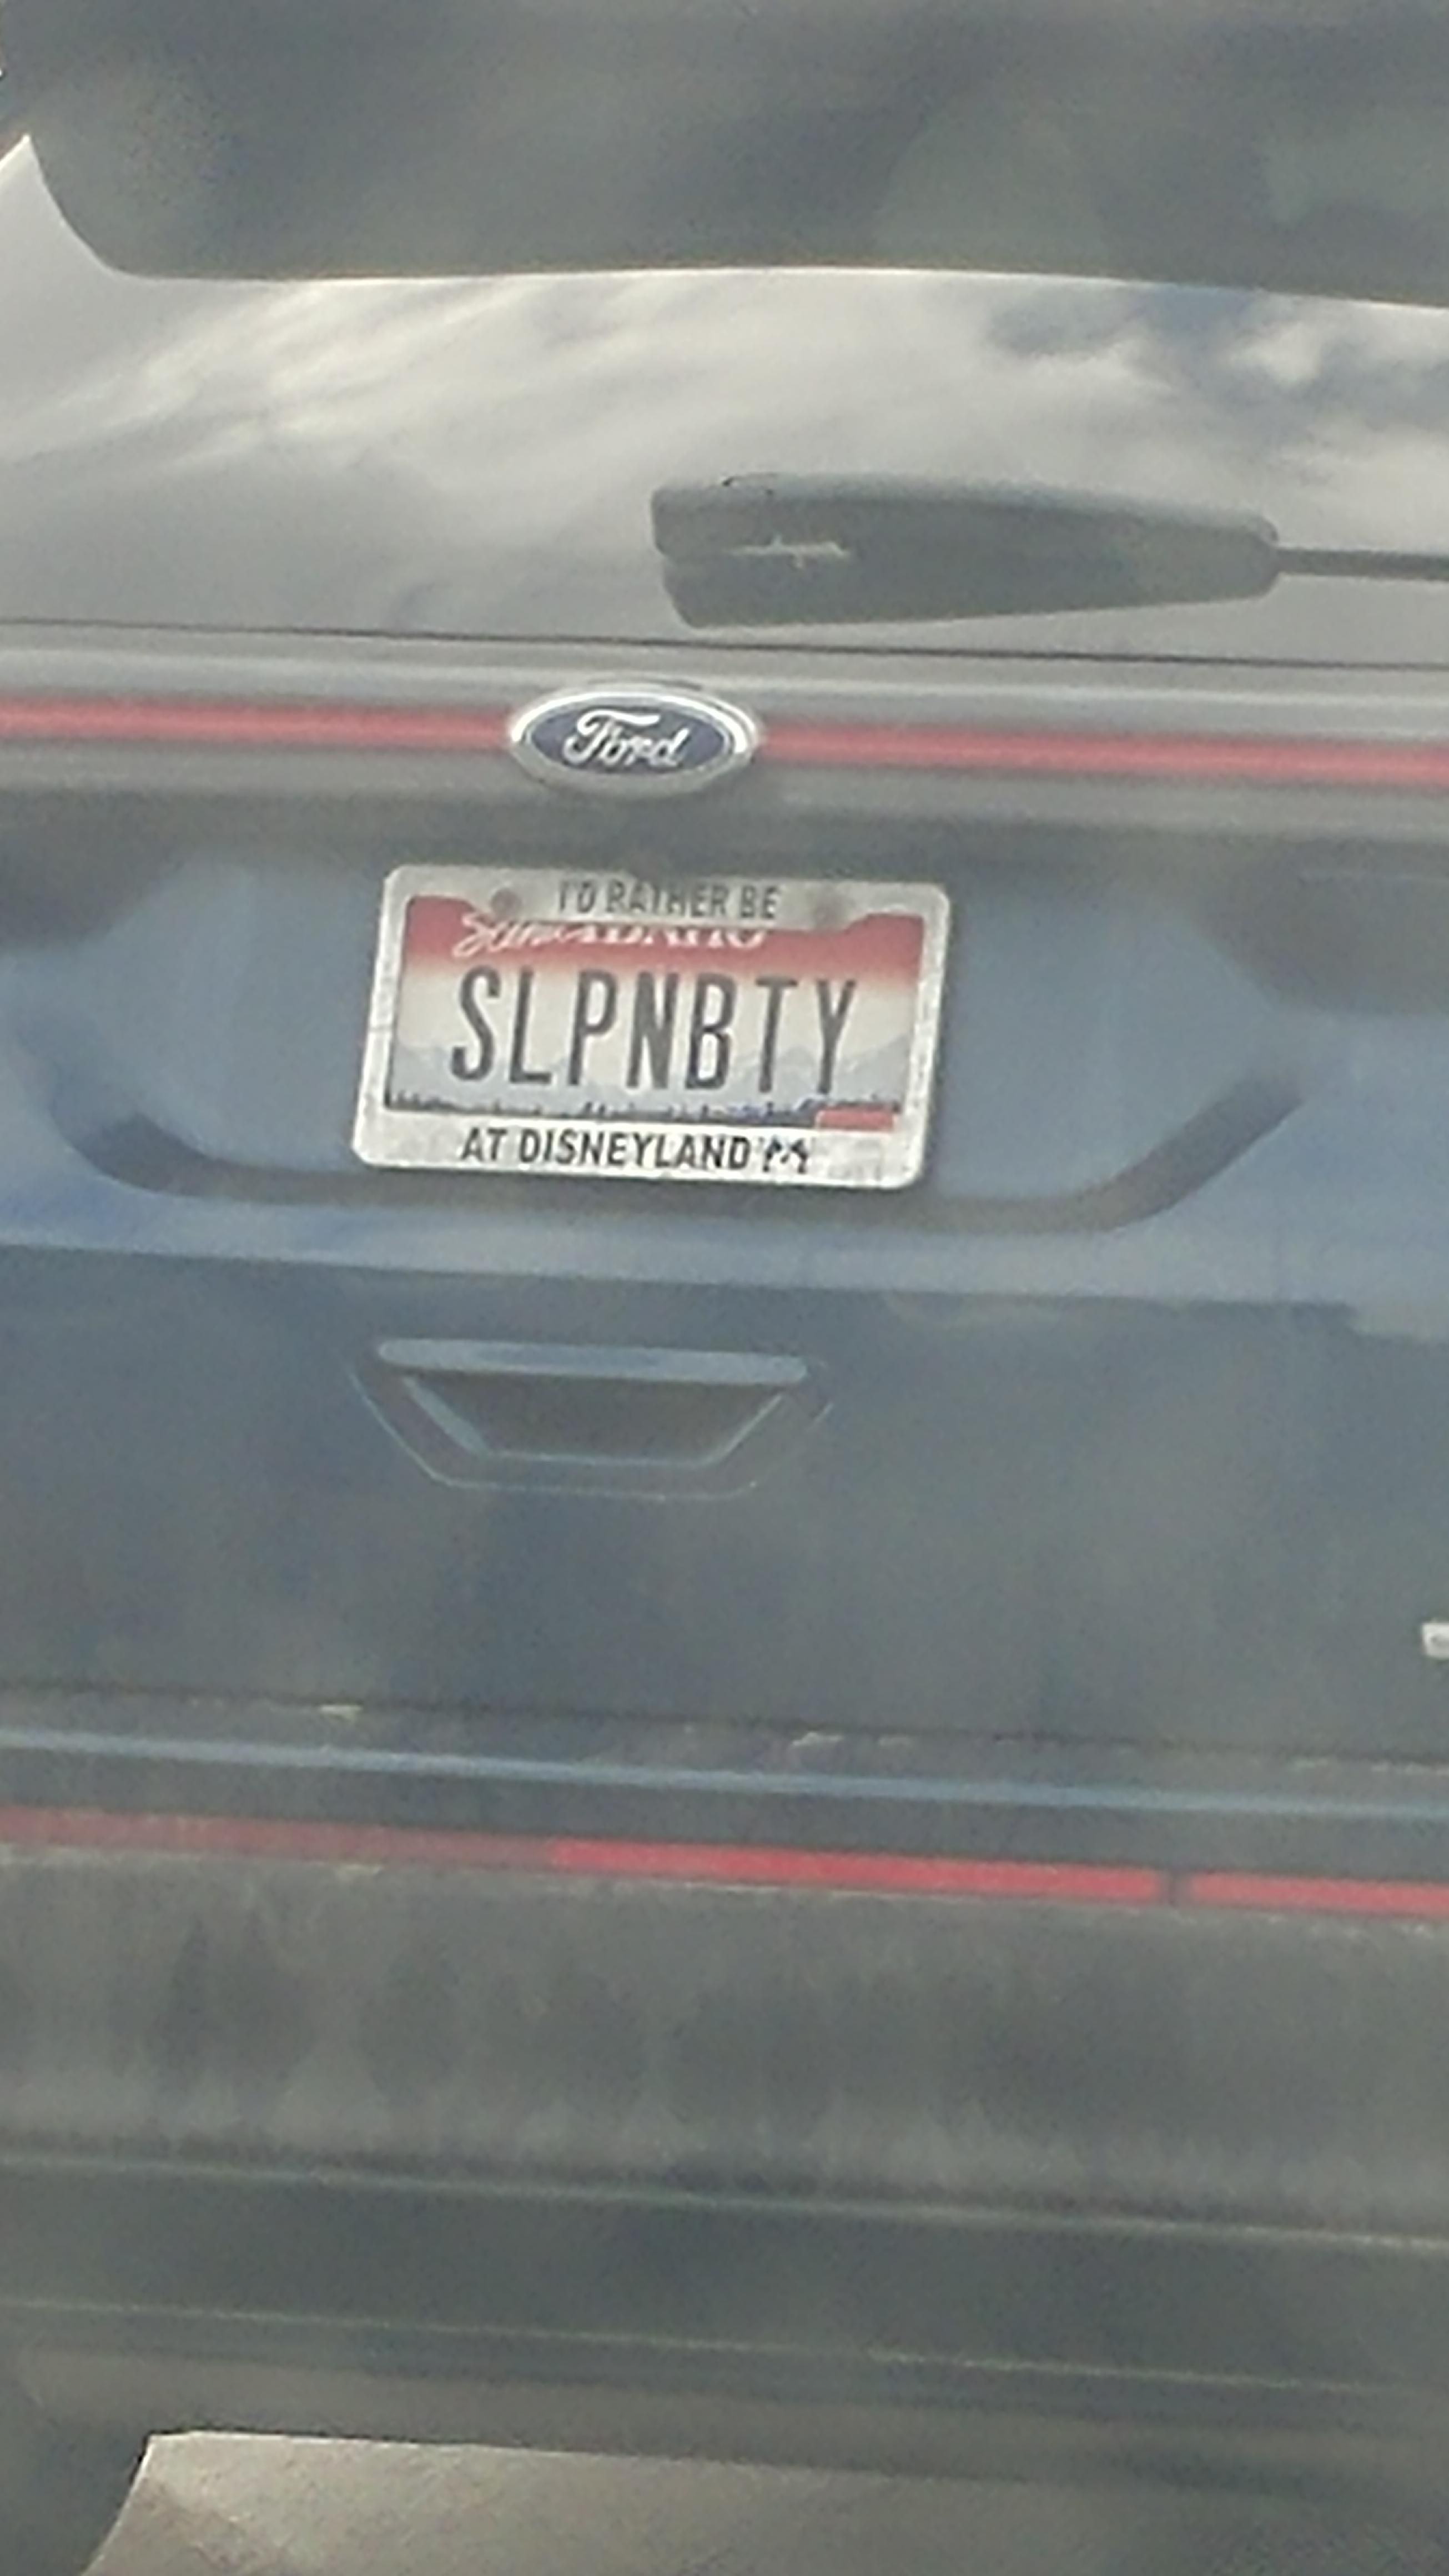 I first read this as "slappin booty" then I noticed the license plate frame.